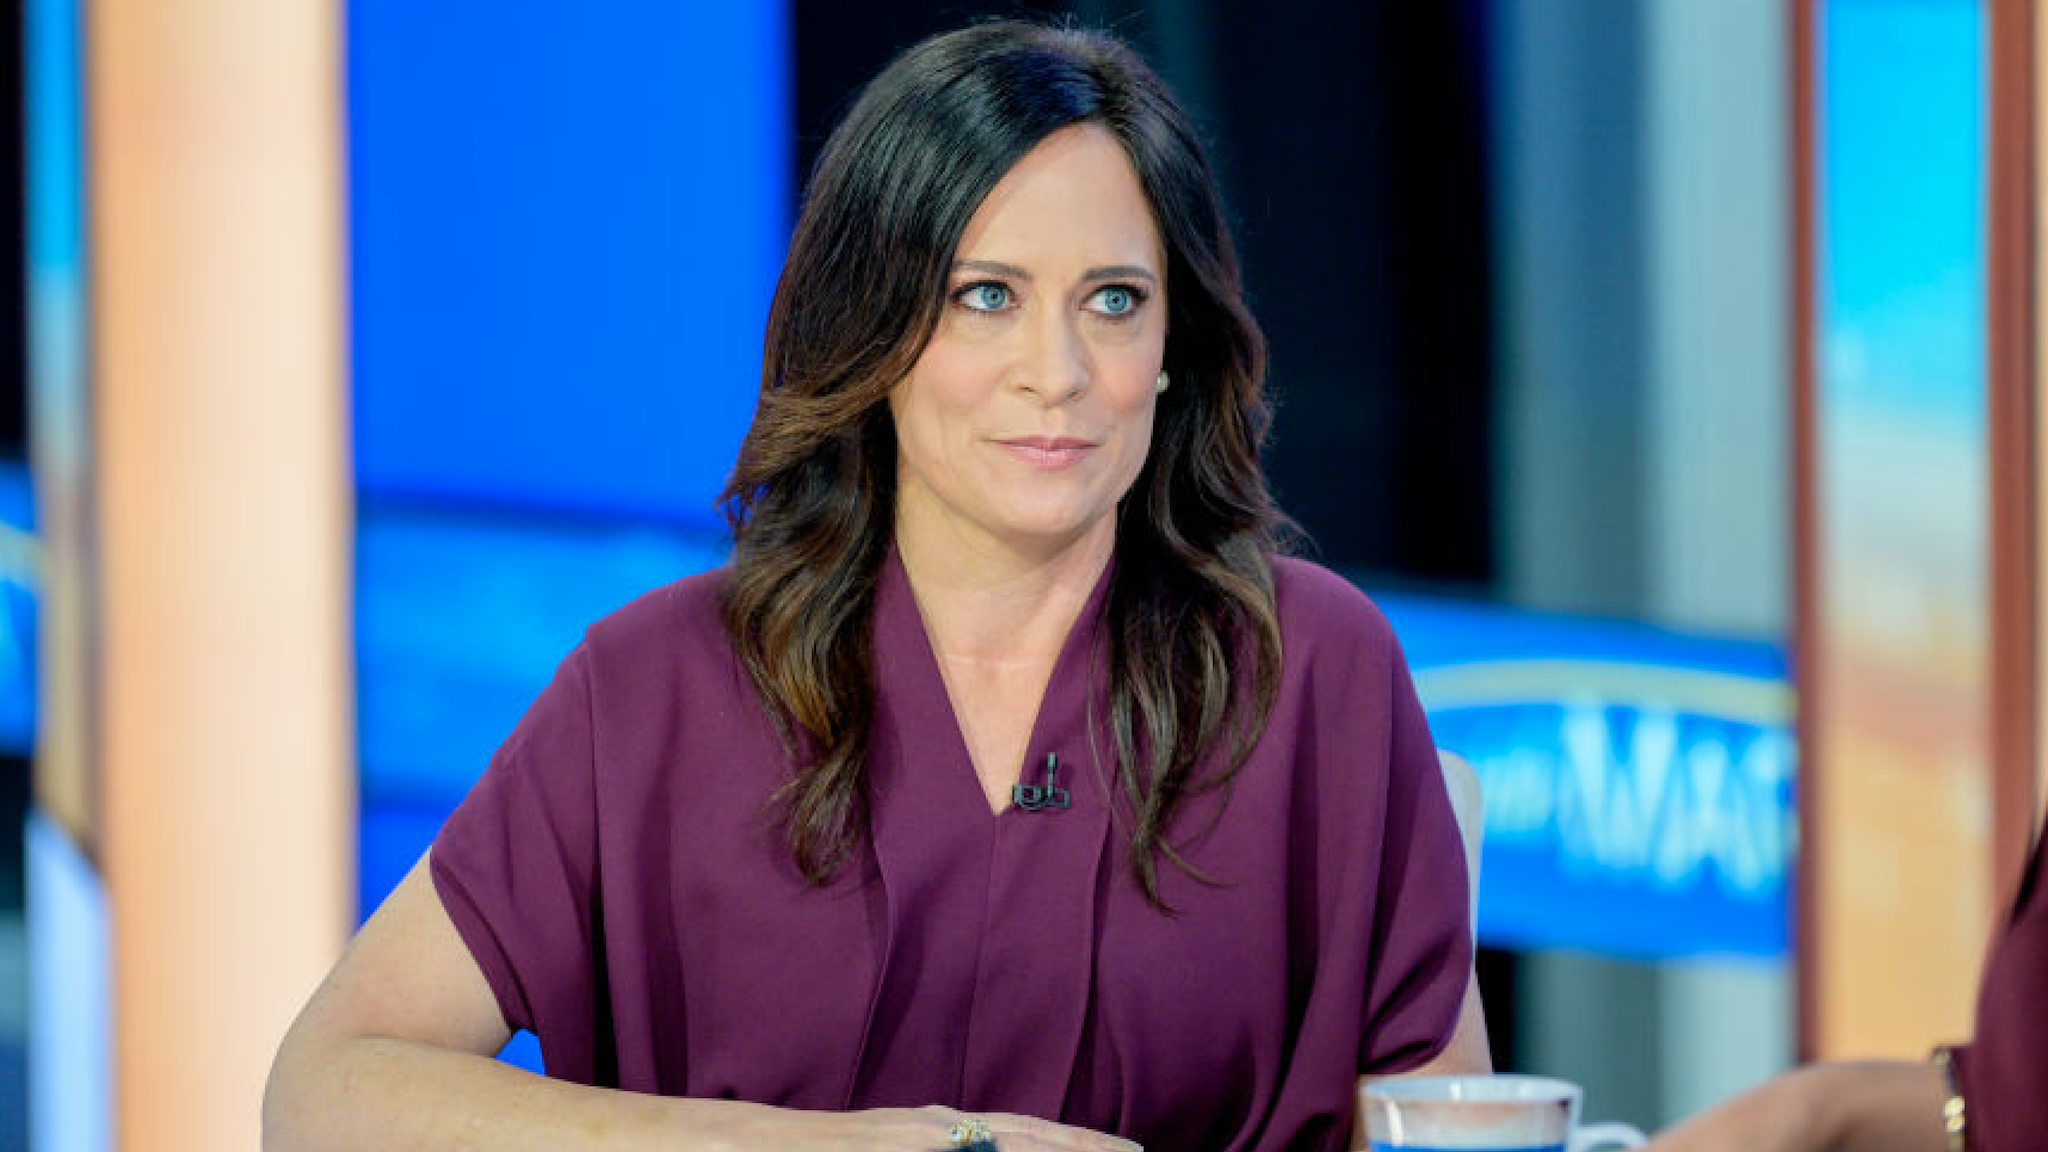 White House Press Secretary Stephanie Grisham visits "Mornings With Maria" with Anchor Maria Bartiromo at Fox Business Network Studios on September 23, 2019 in New York City.